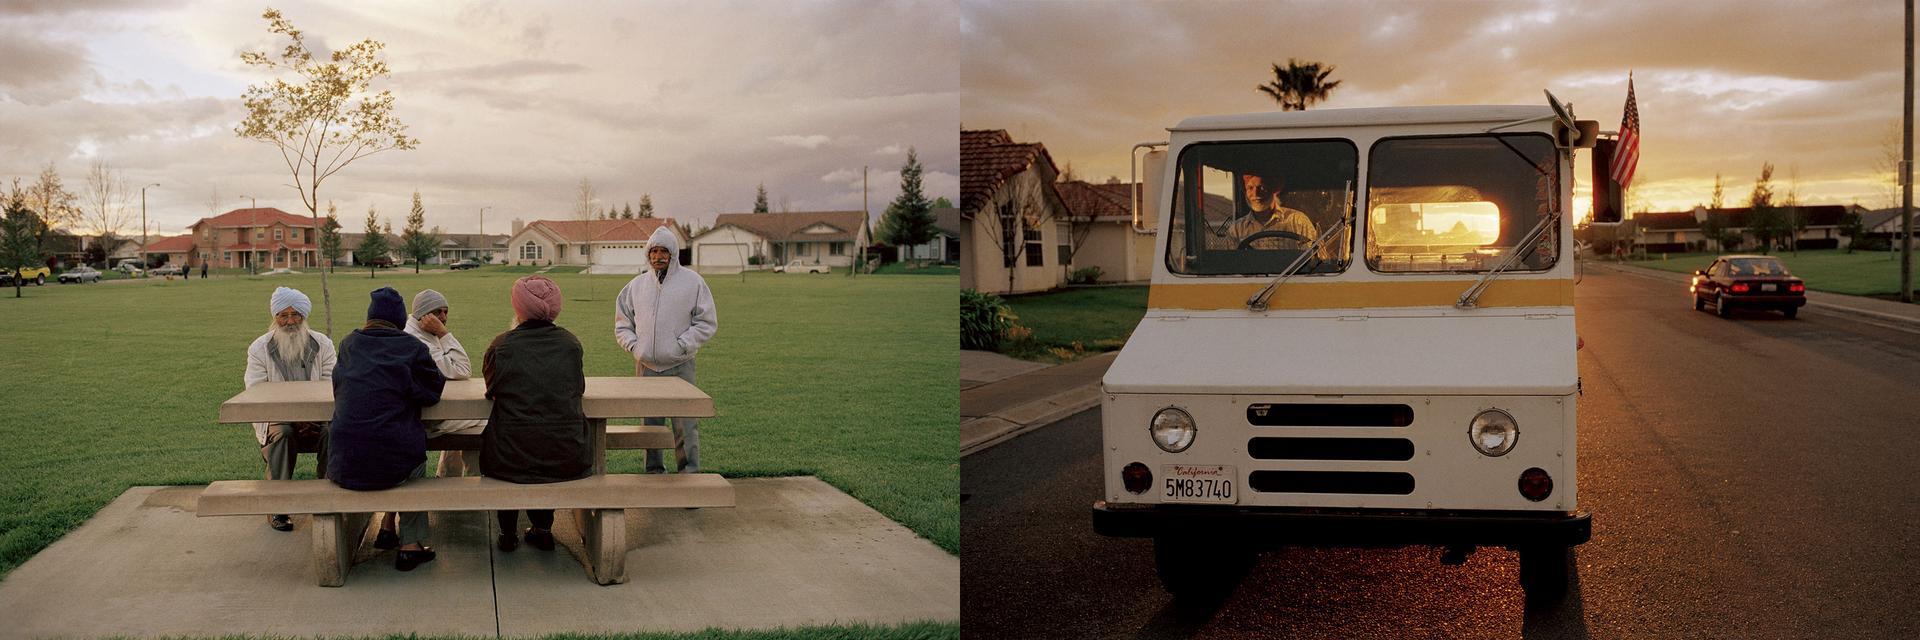 Gauri Gill, *U.S. Mailman/Men in Park. Yuba City 2001*, 2001, from the series “The Americans,” 2000–07. Archival pigment print, 16 1/2 x 50 inches.